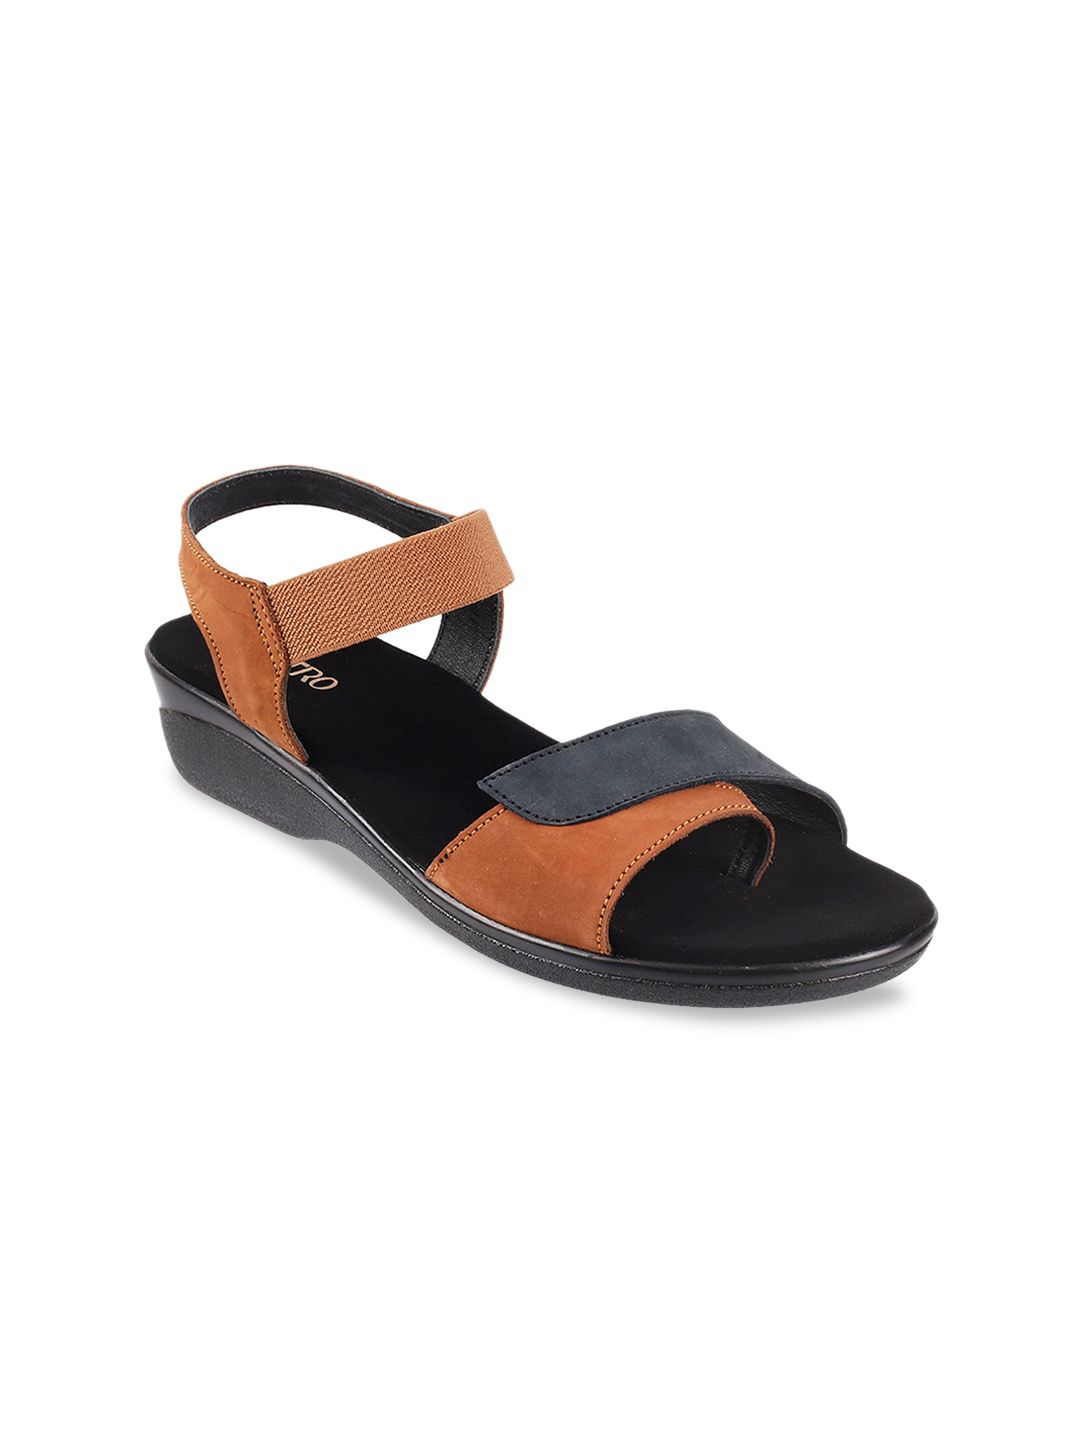 Metro Women Brown Colourblocked Leather Sandals Price in India